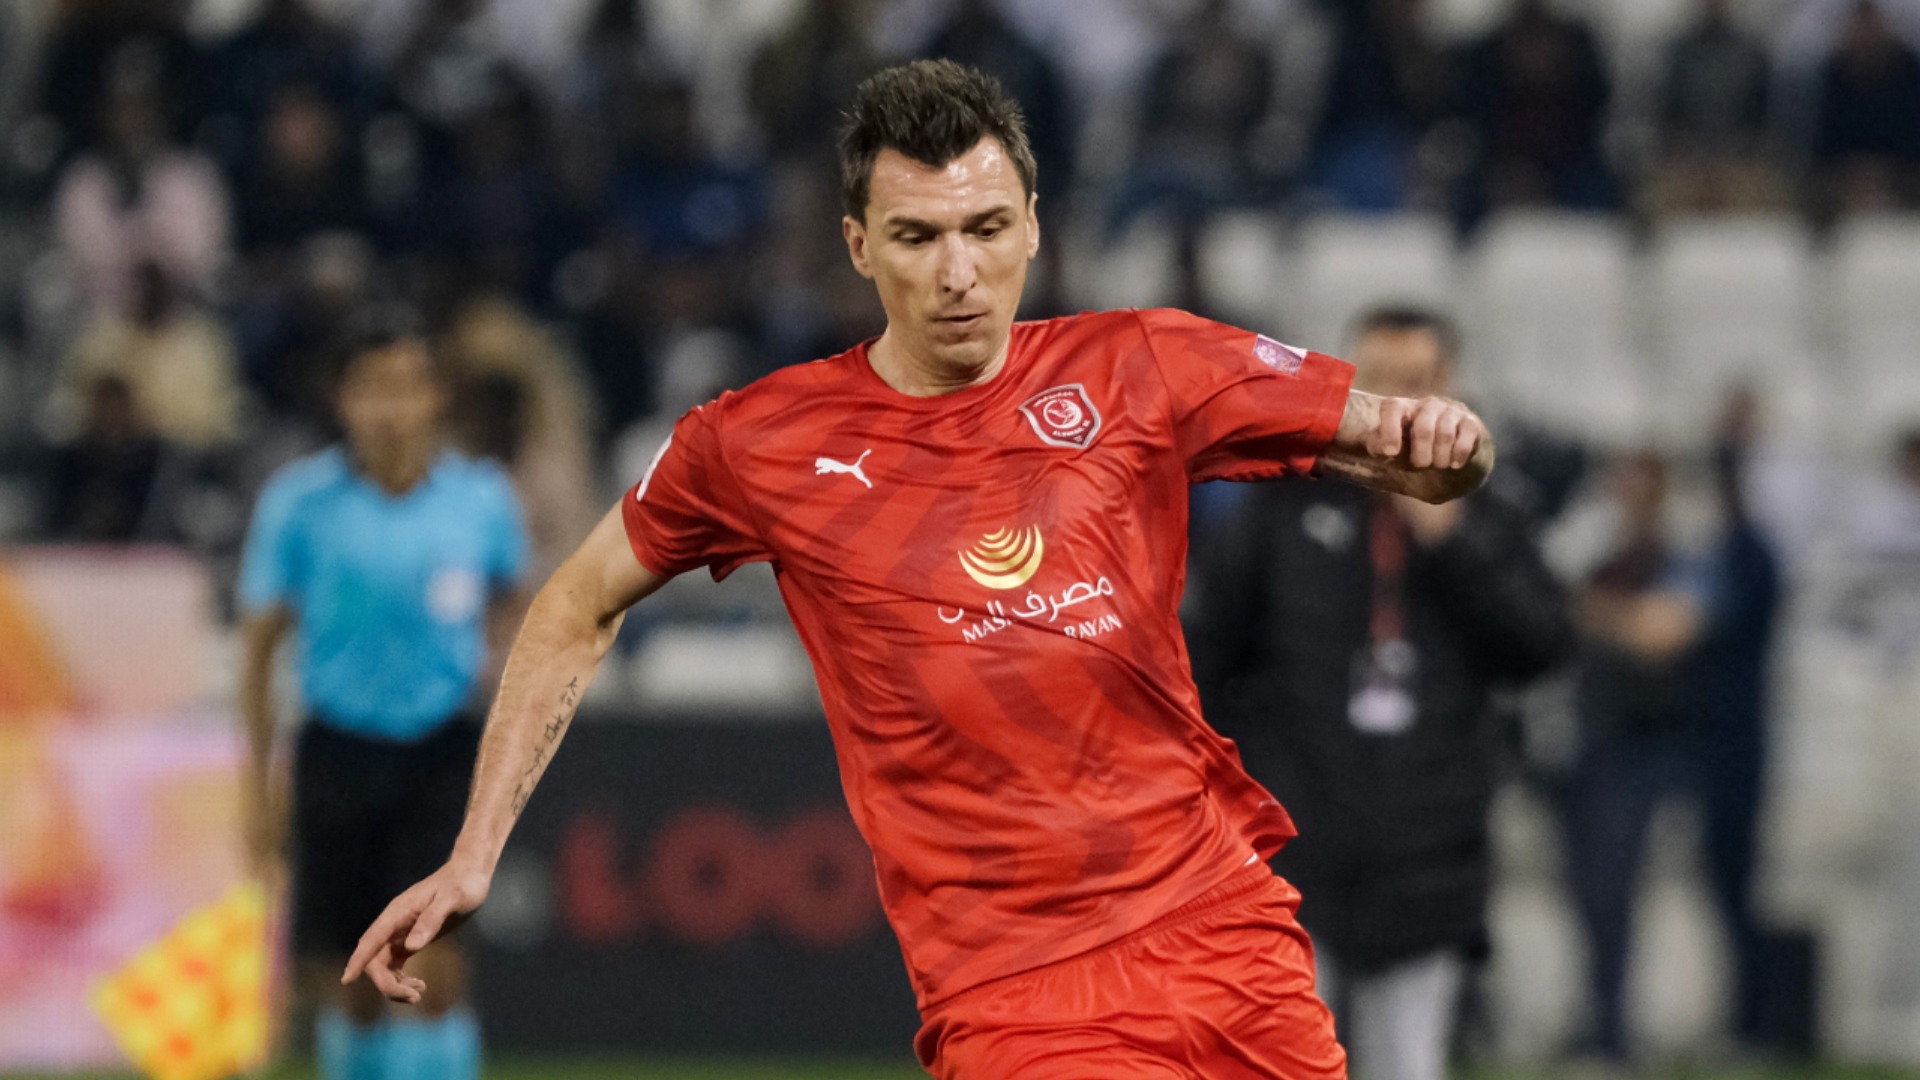 Serie A leaders Milan have bolstered their options in support of Zlatan Ibrahimovic by signing Mario Mandzukic.